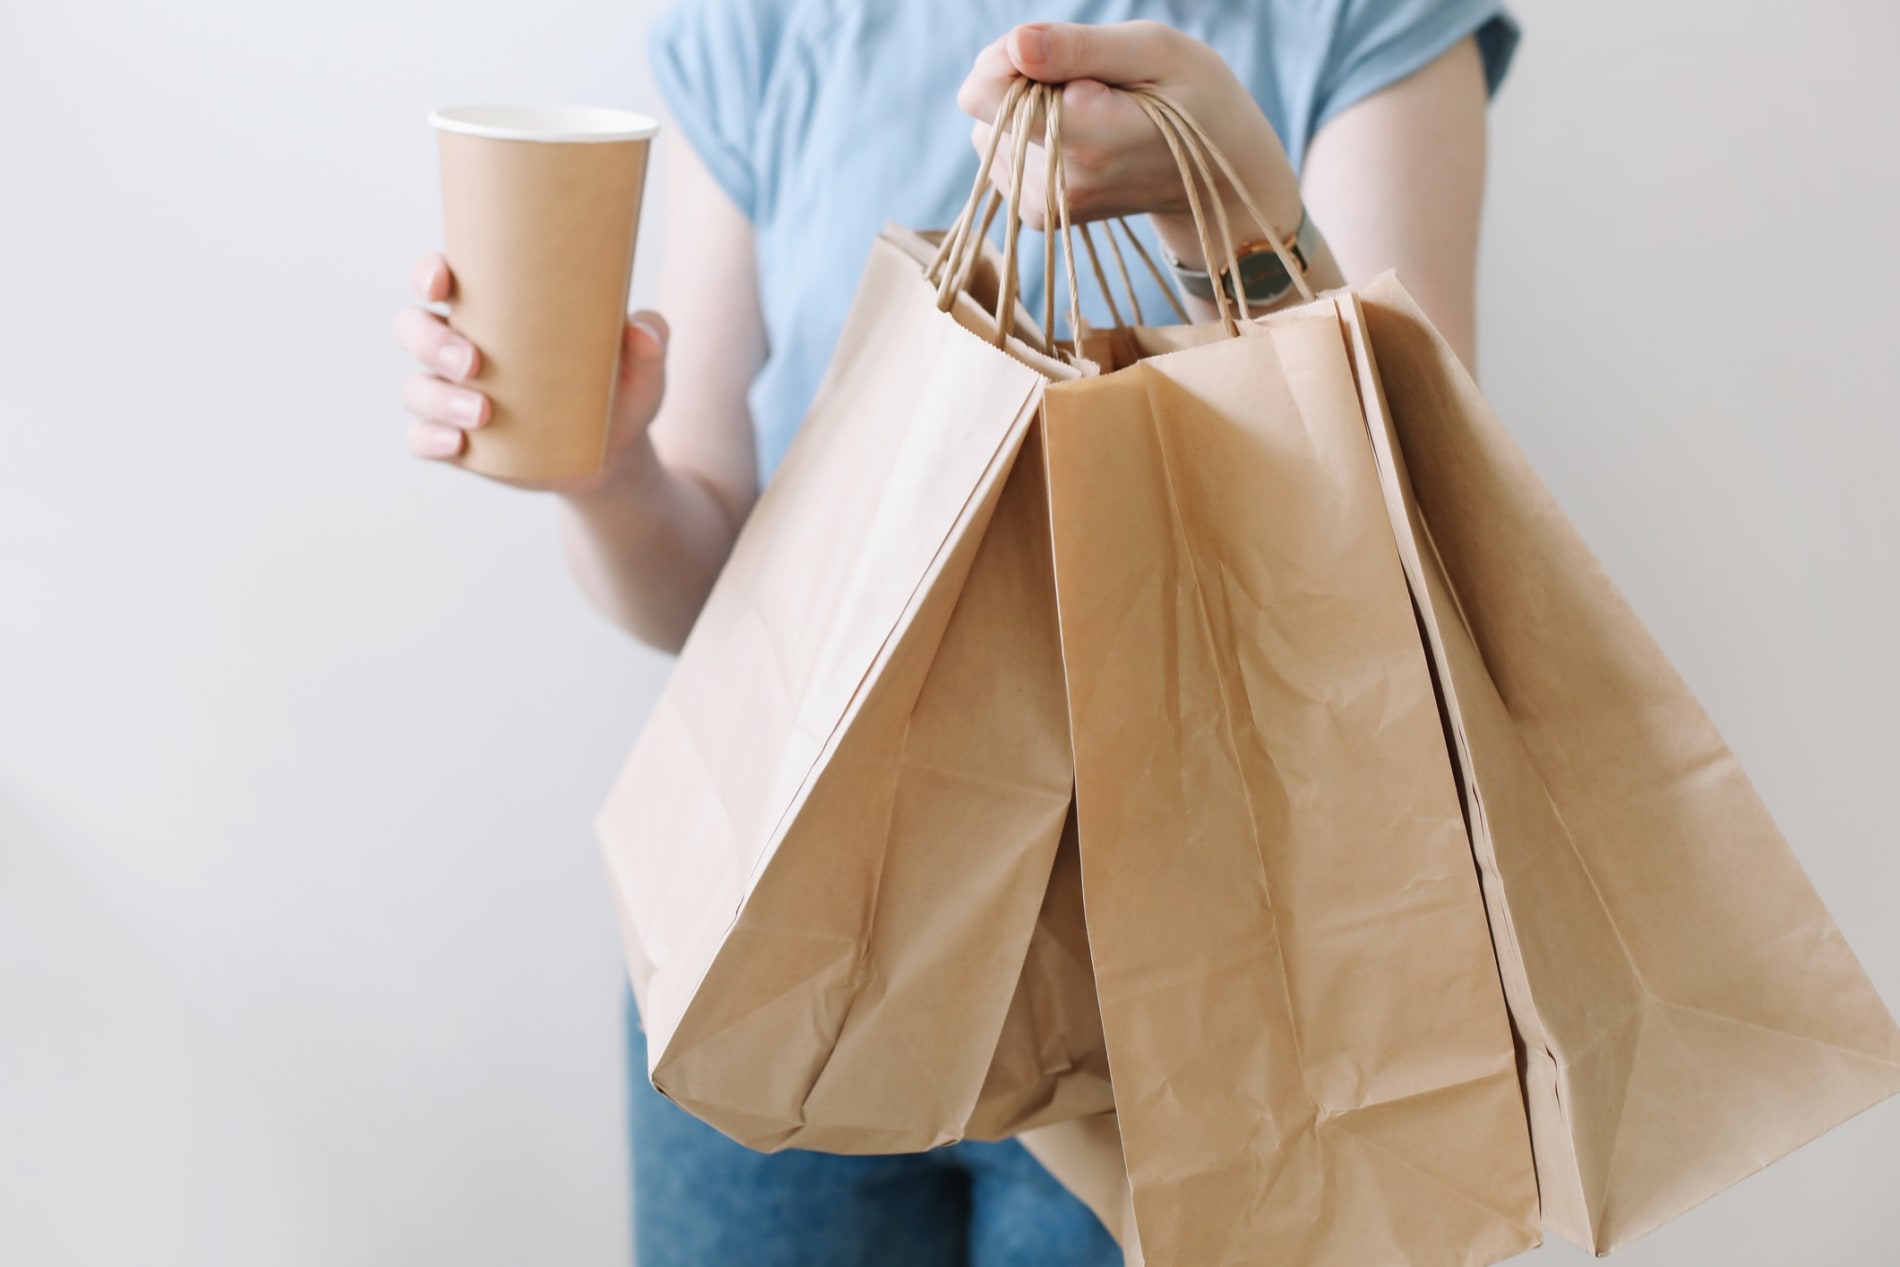 9 ways to shop ethically and help the environment